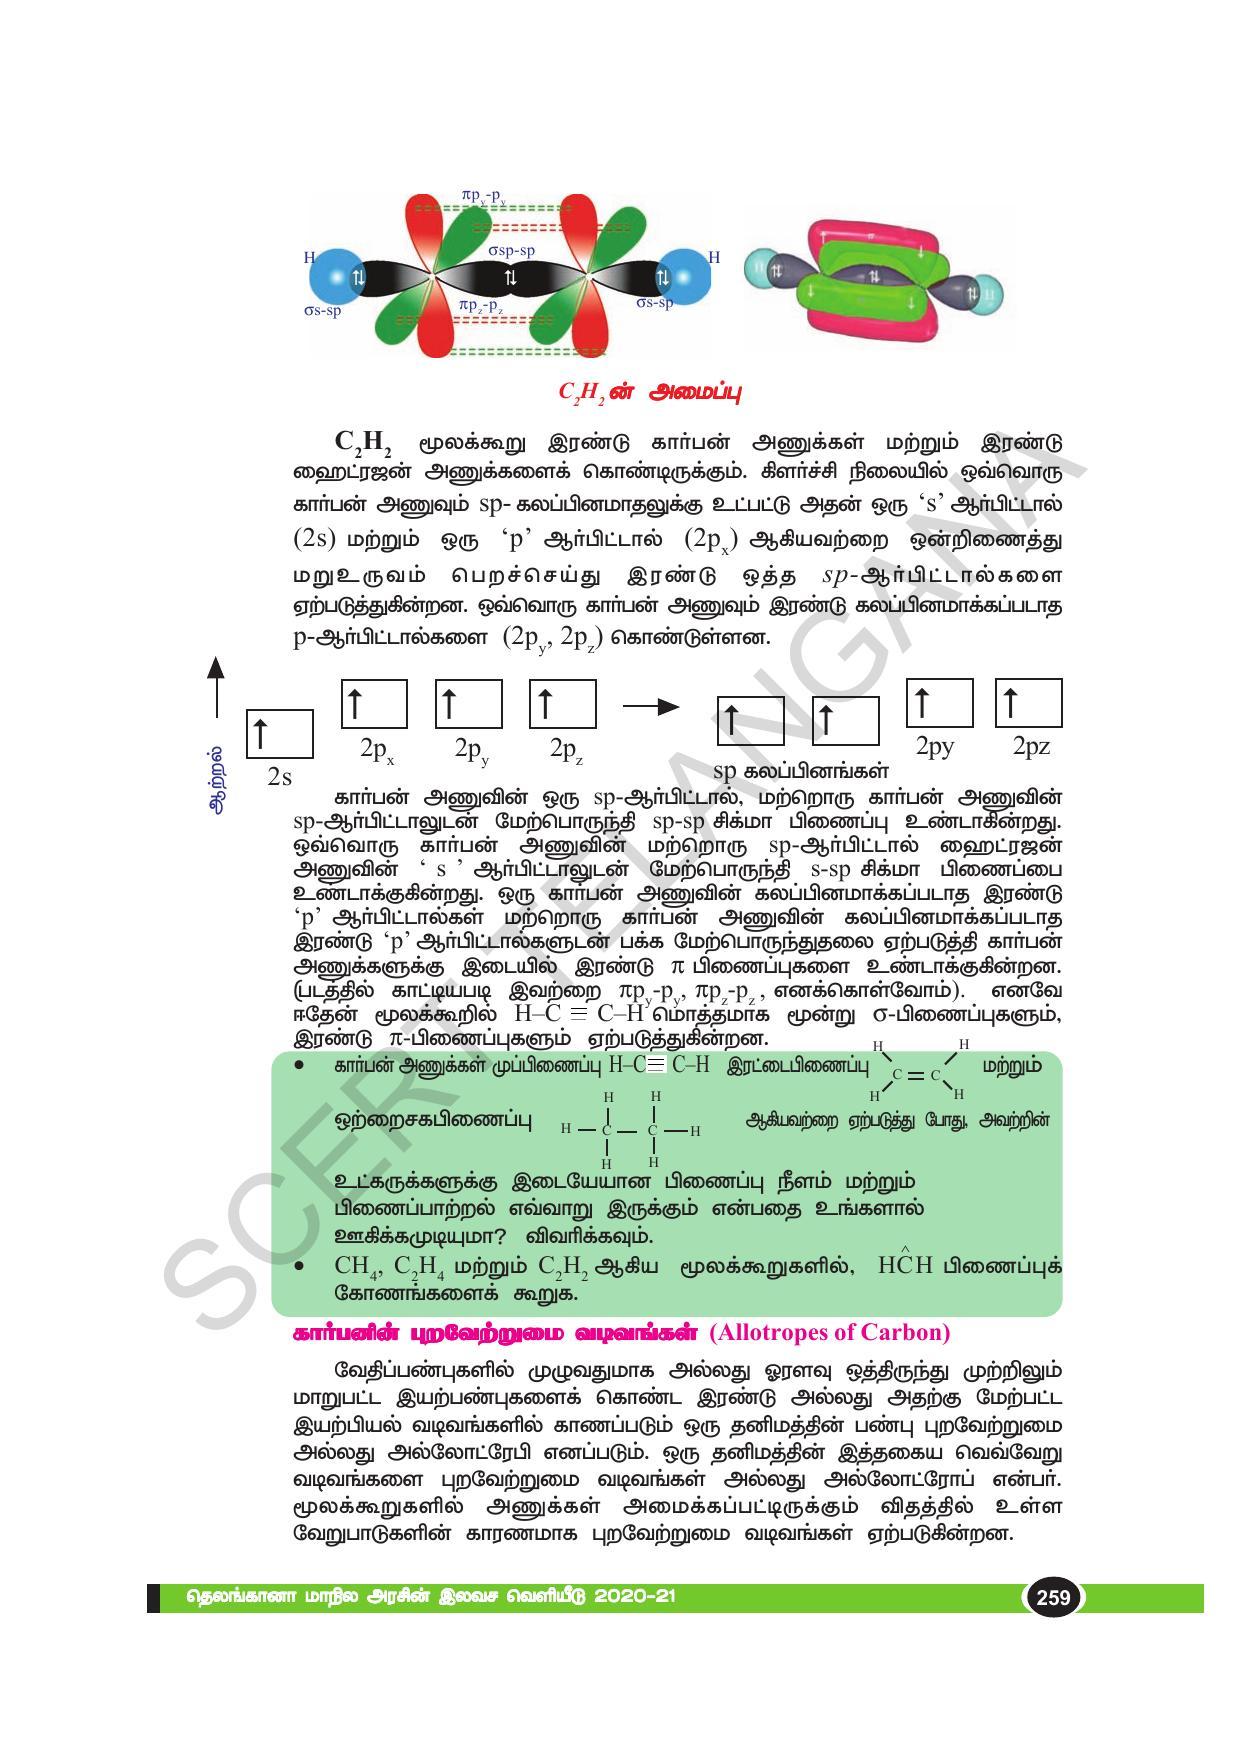 TS SCERT Class 10 Physical Science(Tamil Medium) Text Book - Page 271